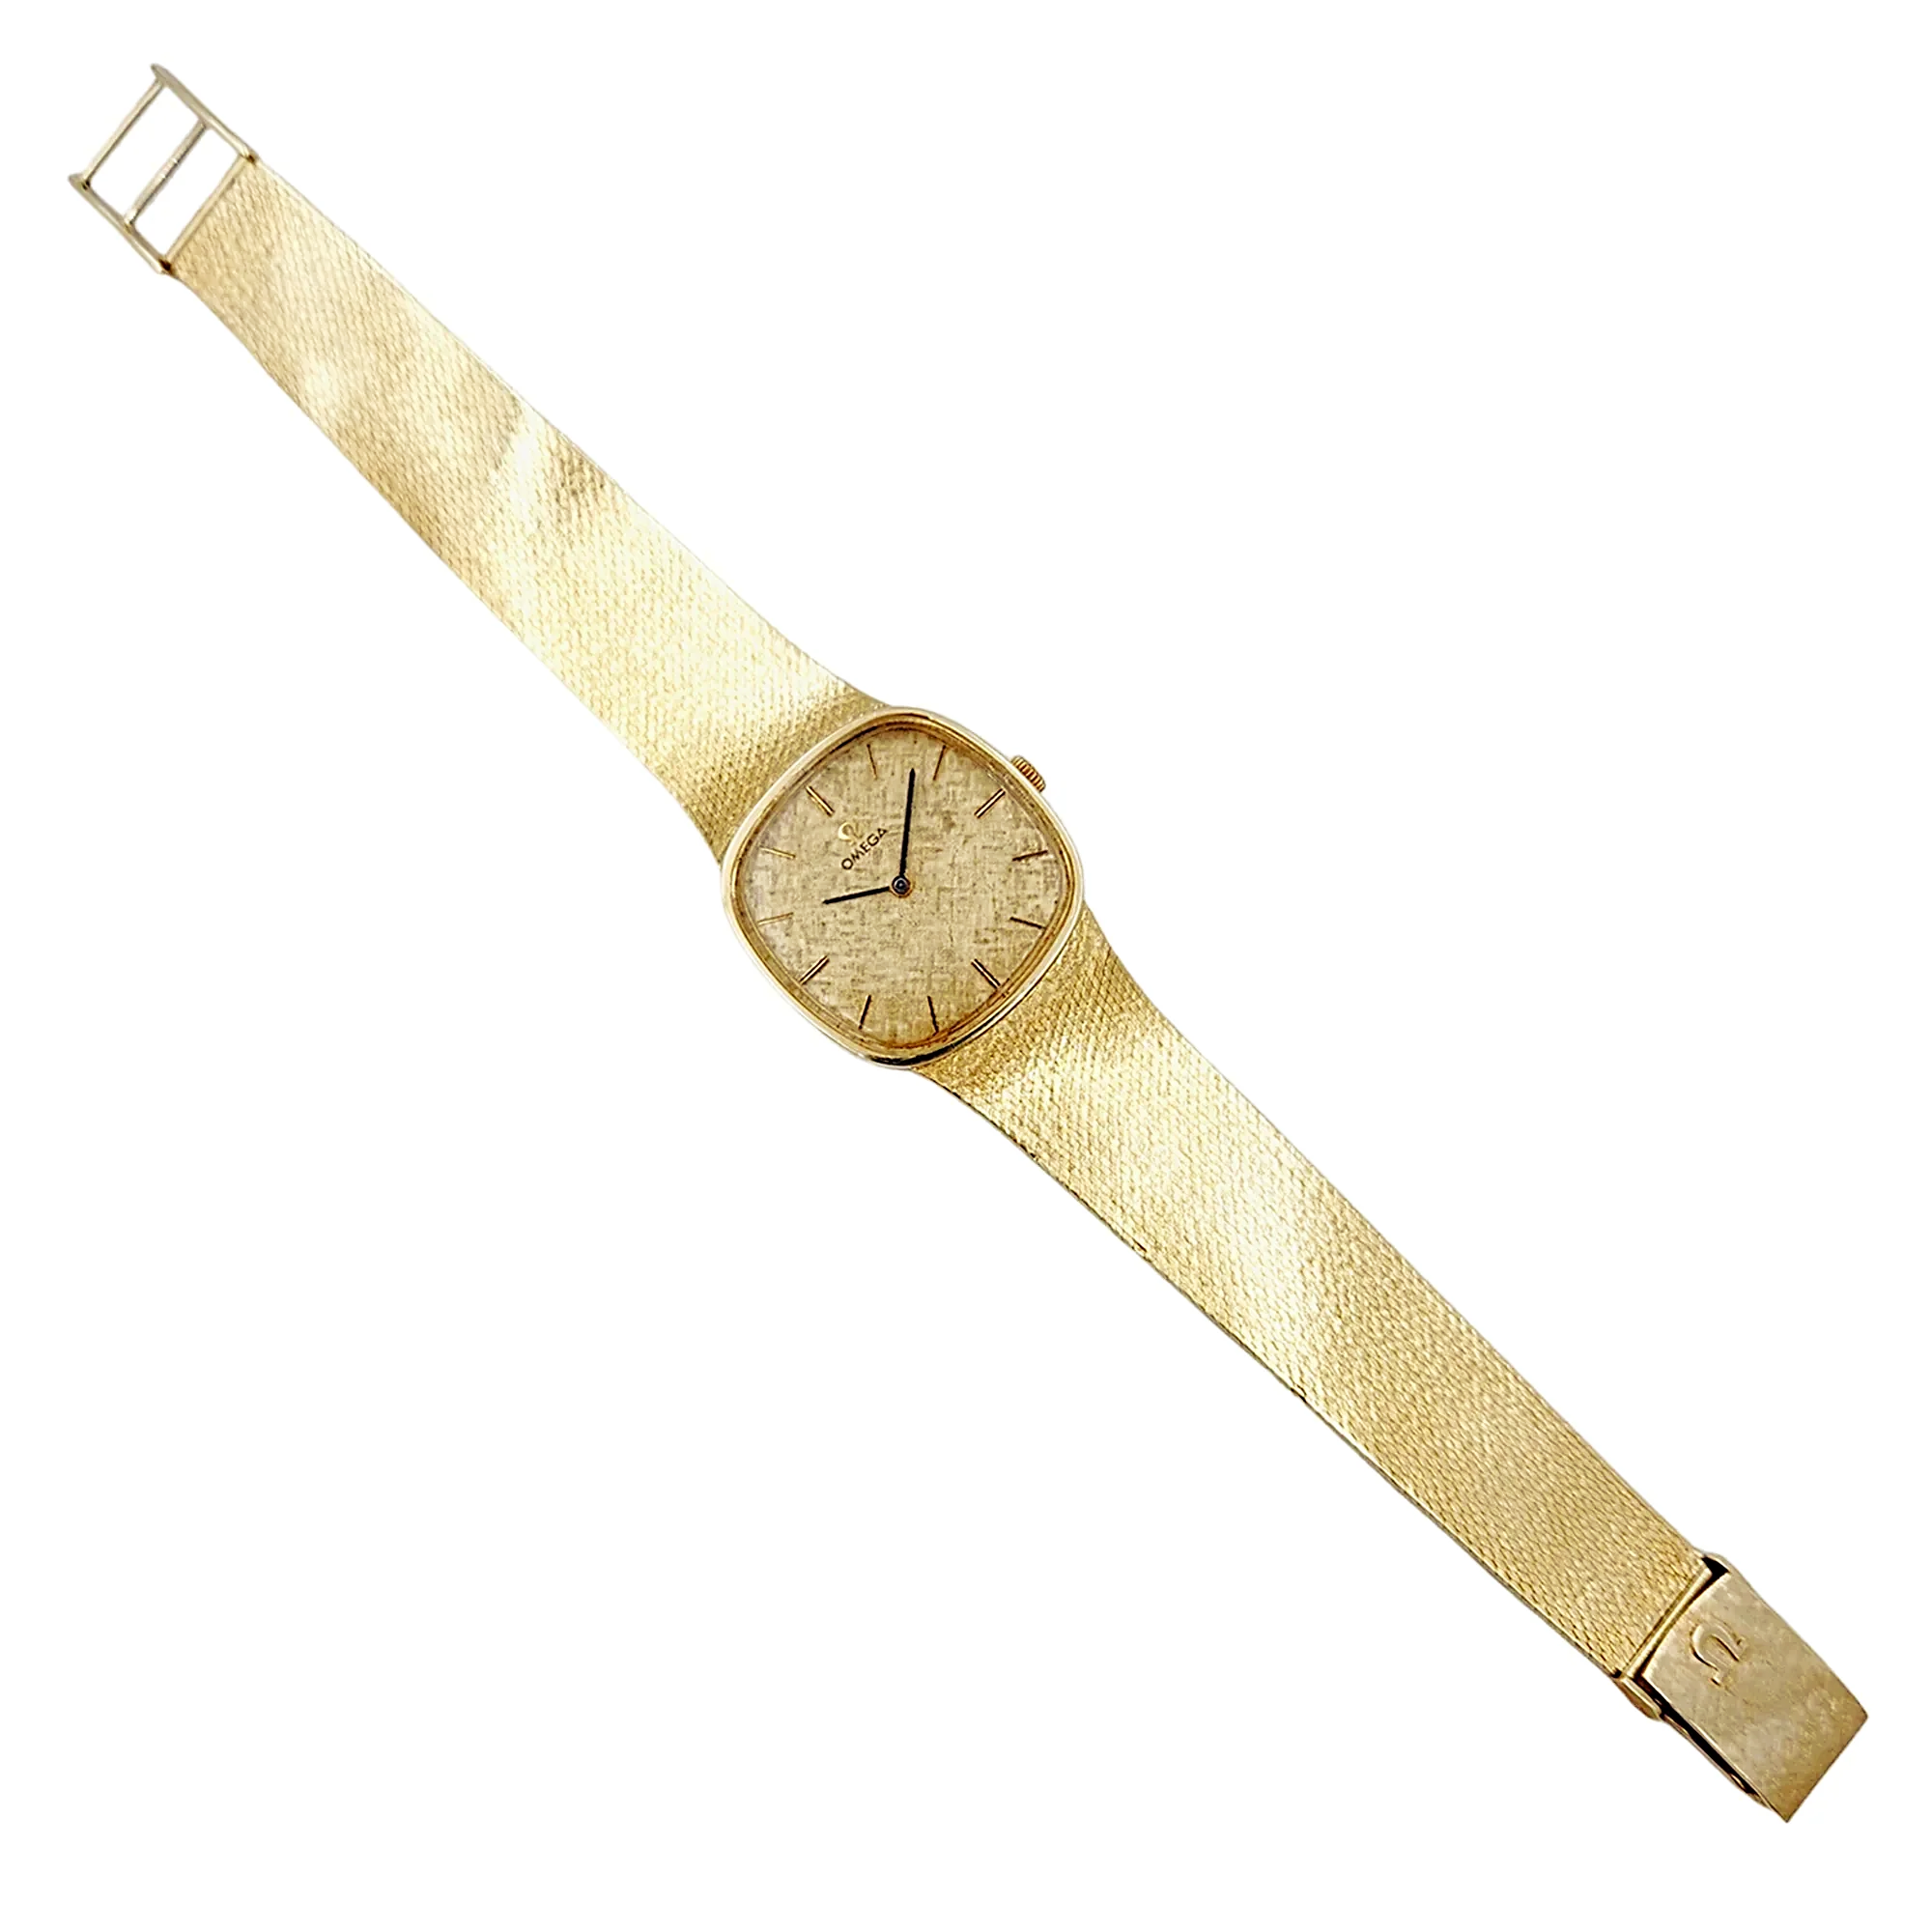 1970's Unisex Omega 29mm Vintage 14K Yellow Gold Watch with Champagne Texture Dial. (Pre-Owned)